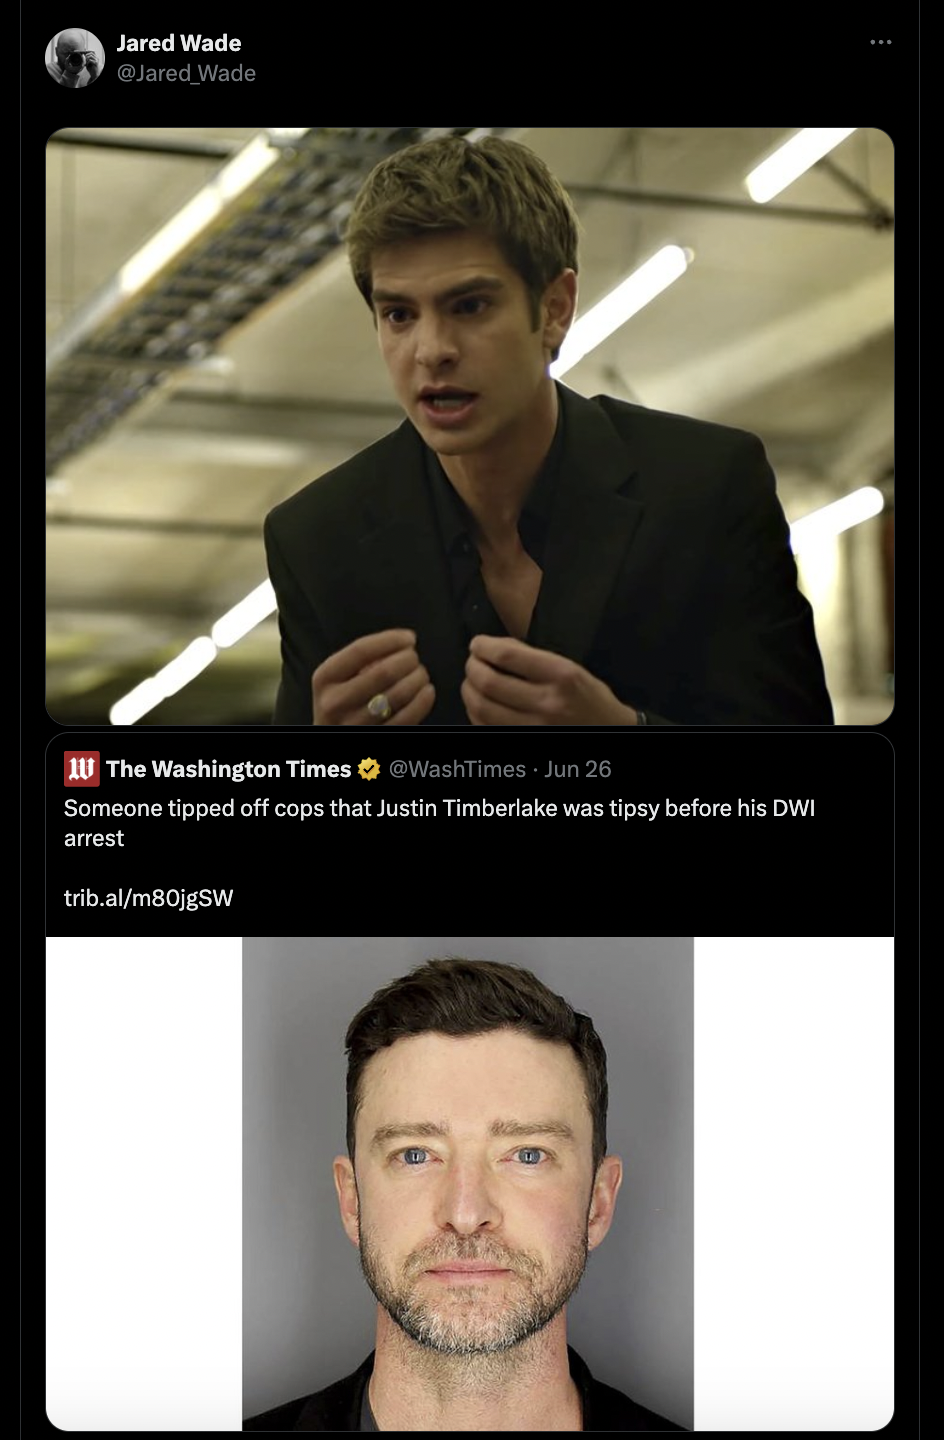 andrew garfield social network character - Jared Wade Wade The Washington Times WashTimes Jun 26 Someone tipped off cops that Justin Timberlake was tipsy before his Dwi arrest trib.alm80jgSW